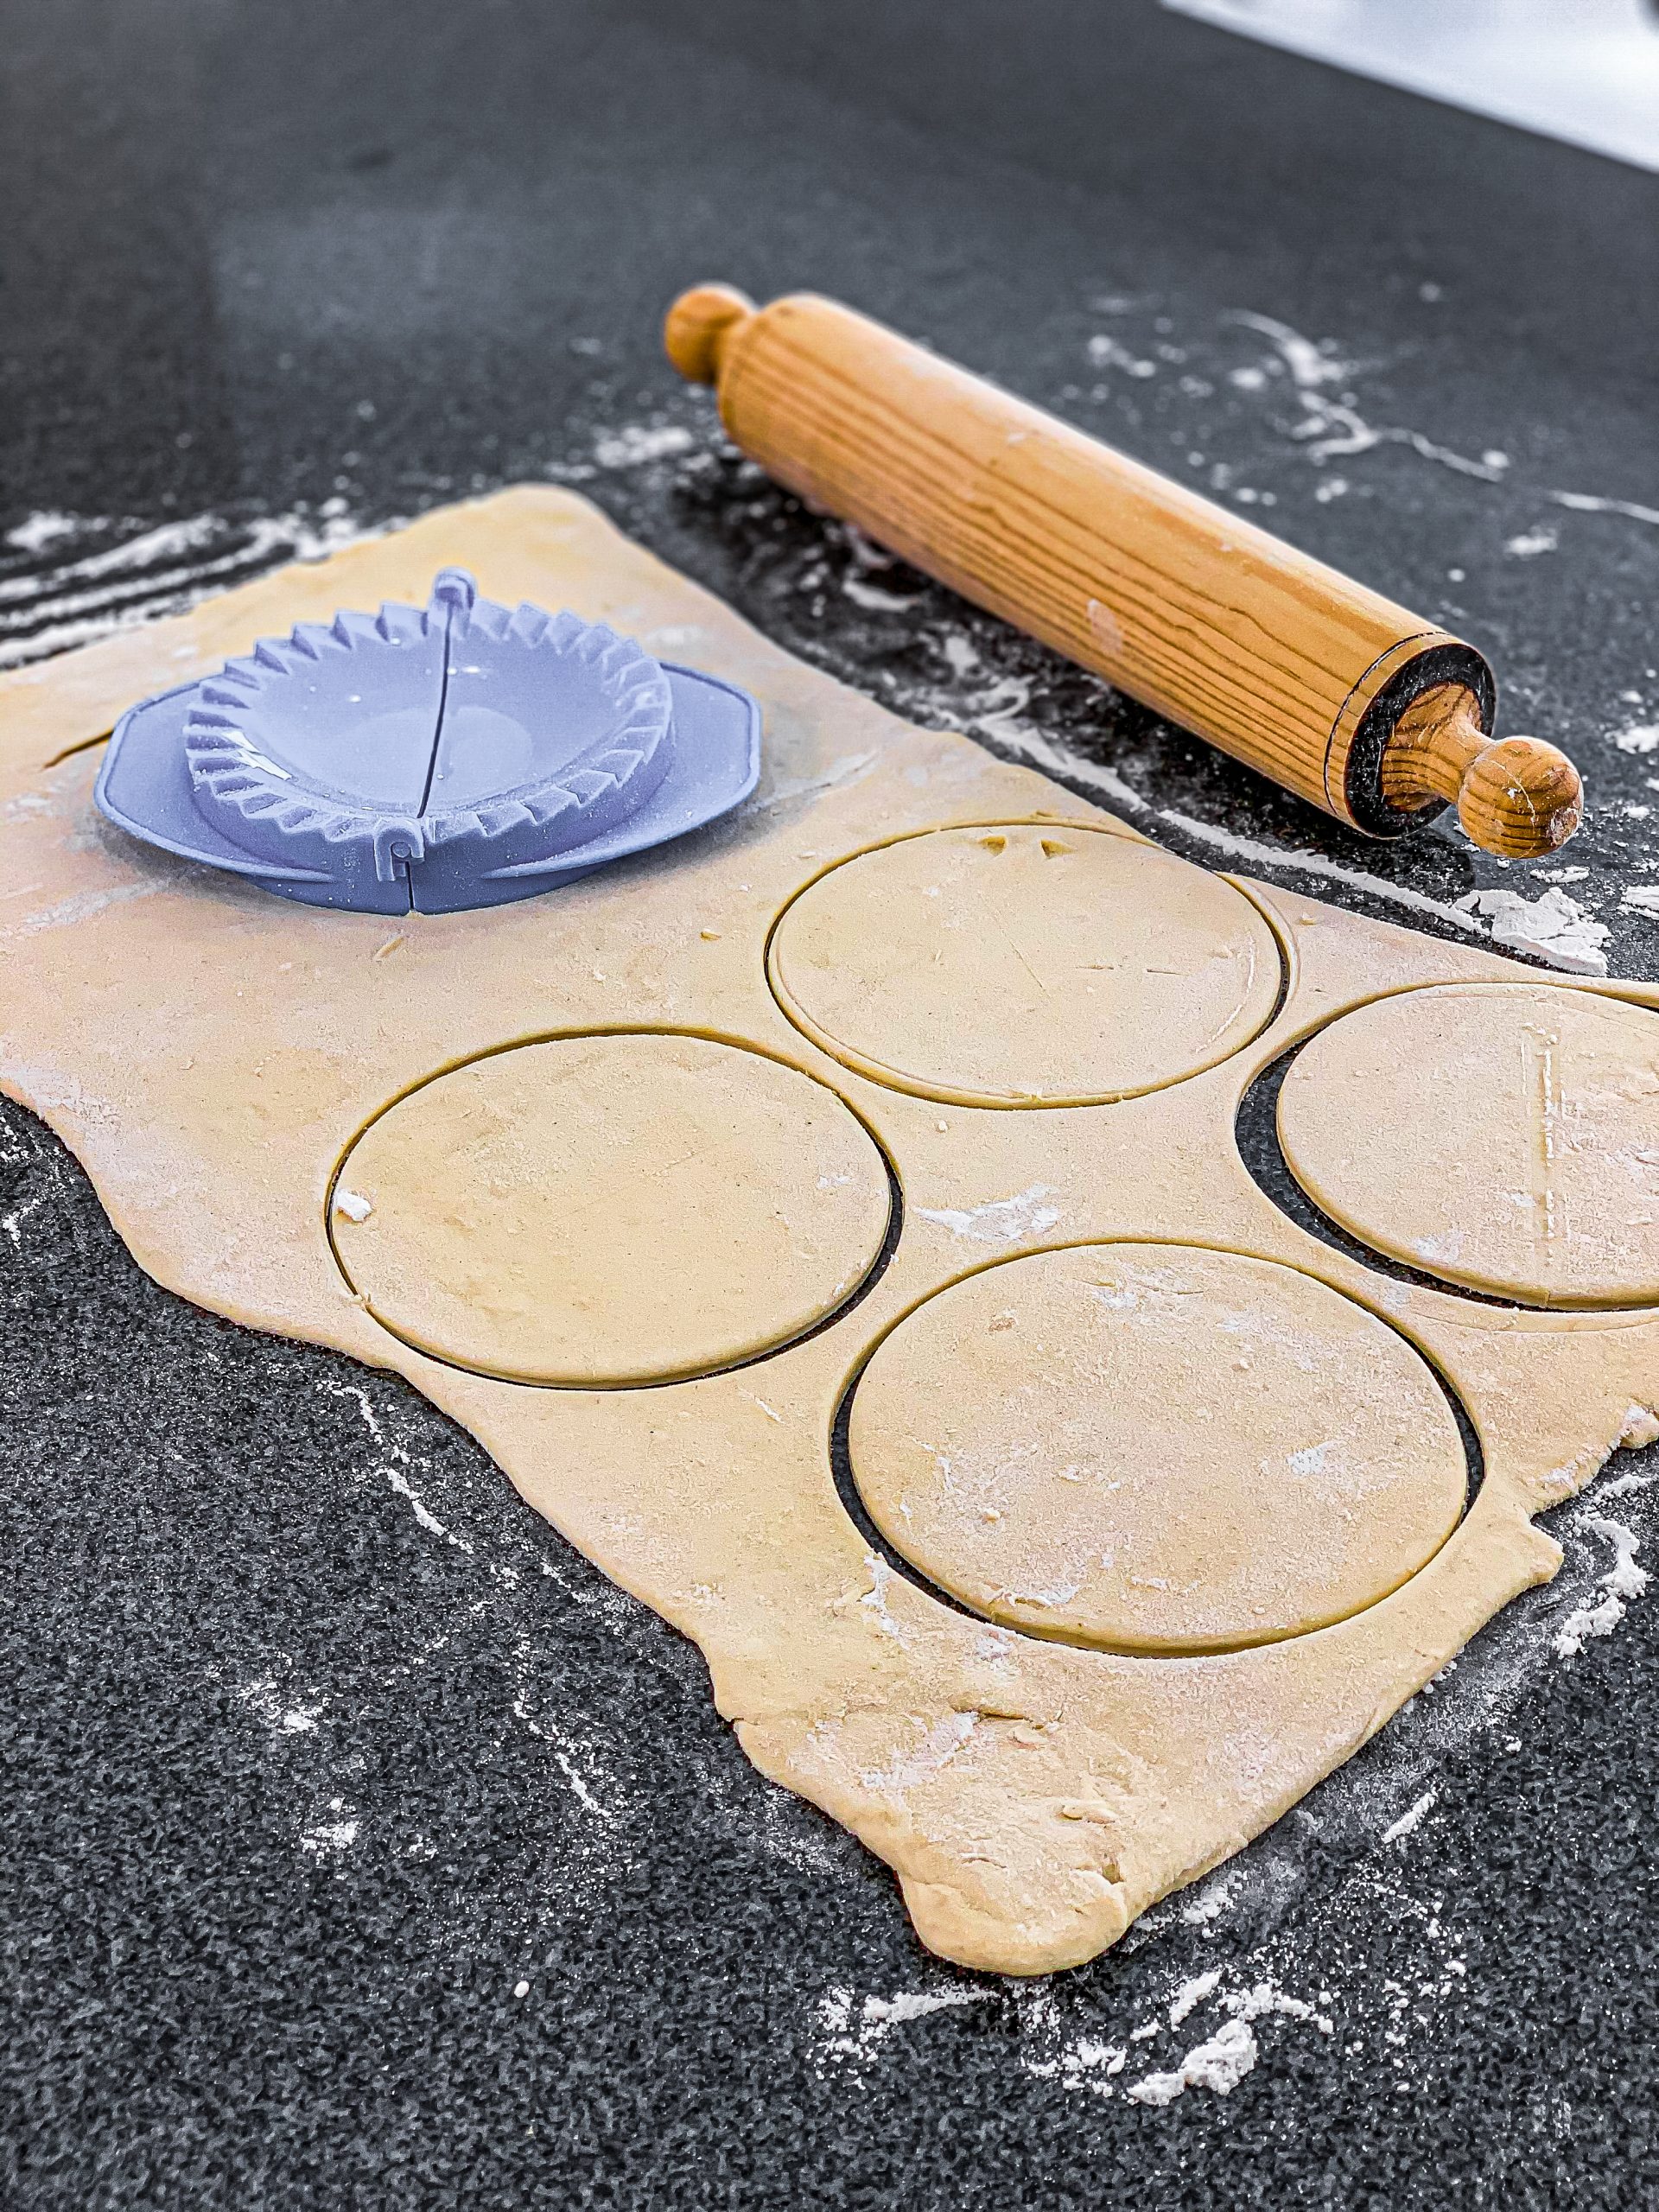 Remove the dough from the refrigerator and roll it in a floured surface. Use a dough press to cut circles. You can also use a round container as a mold.